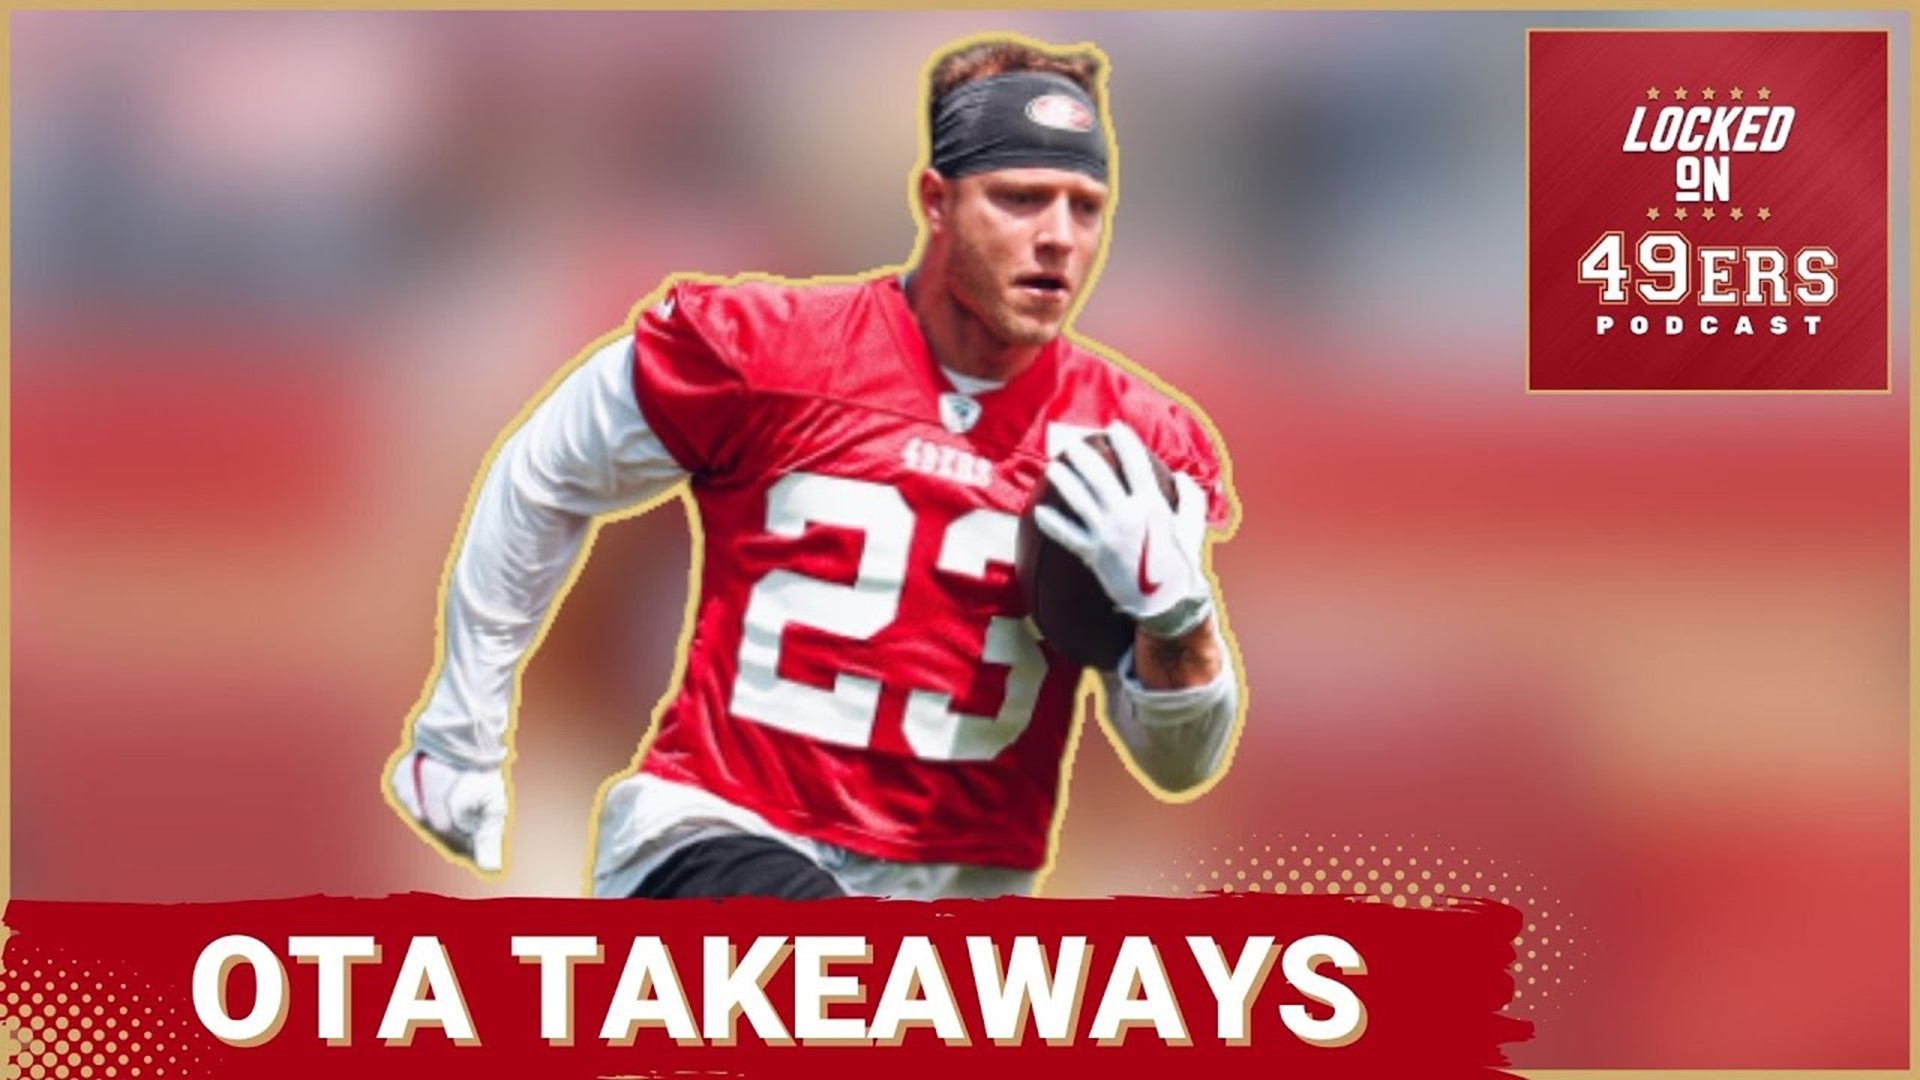 Notes from OTA's, Christian McCaffrey setting the tone, offensive line depth chart, and where 49ers wide receivers Deebo Samuel and Brandon Aiyuk rank and more